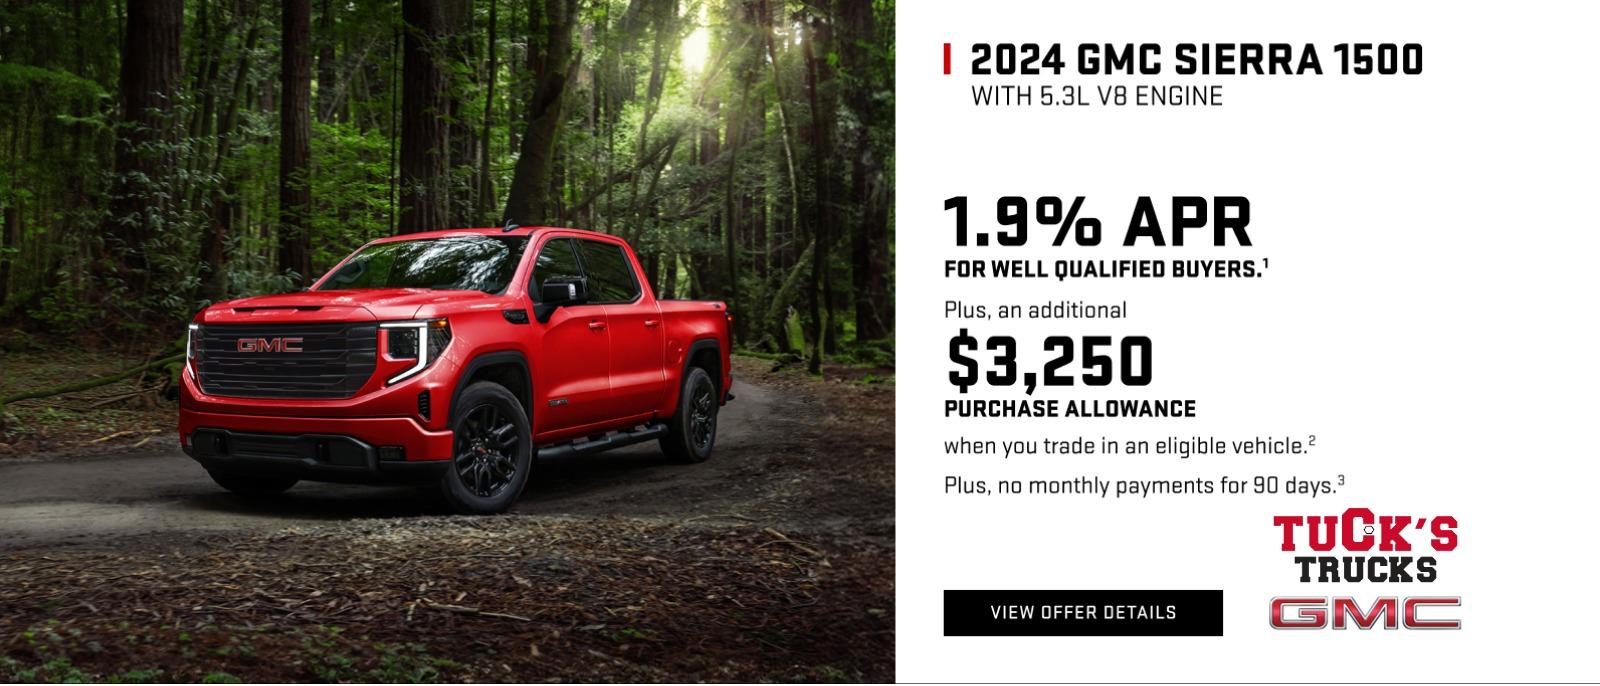 1.9% APR and $3,250 Purchase Allowance on Sierra 1500 with 5.3L V8